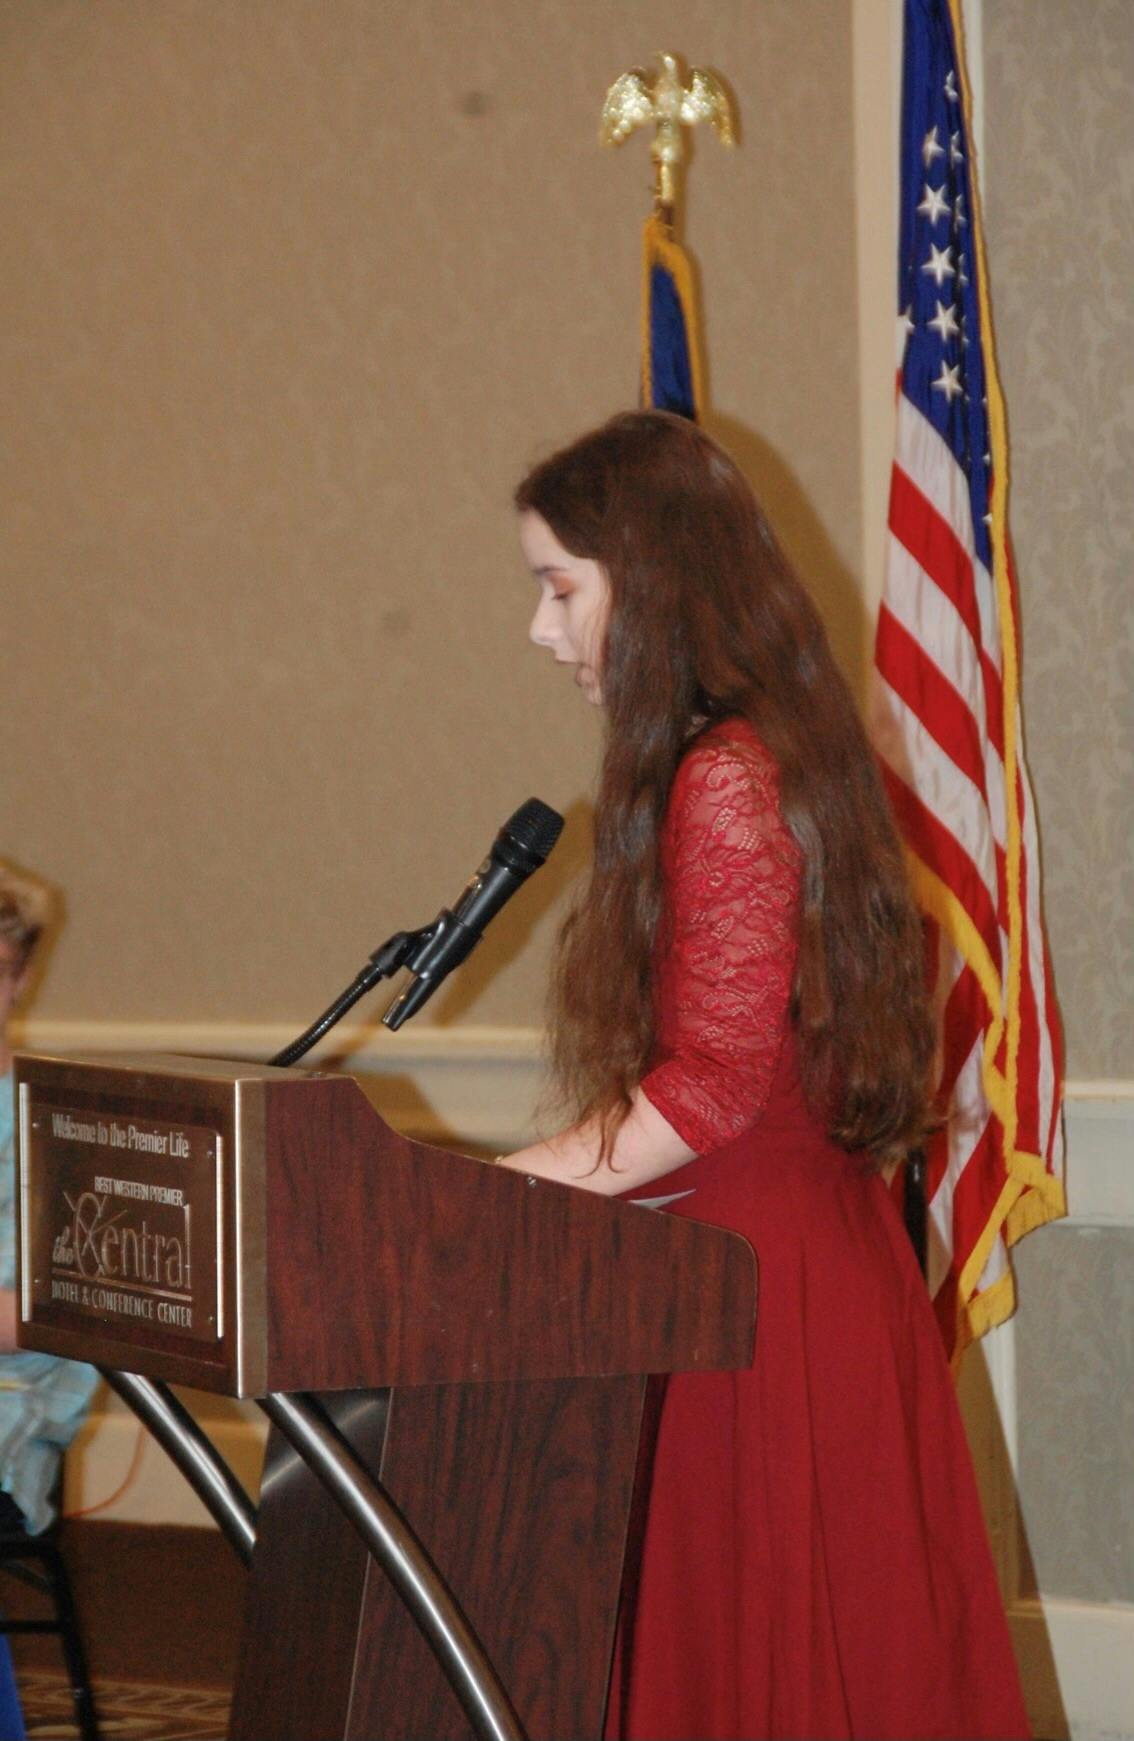 Middle school student speaks at lectern for an honor society induction.